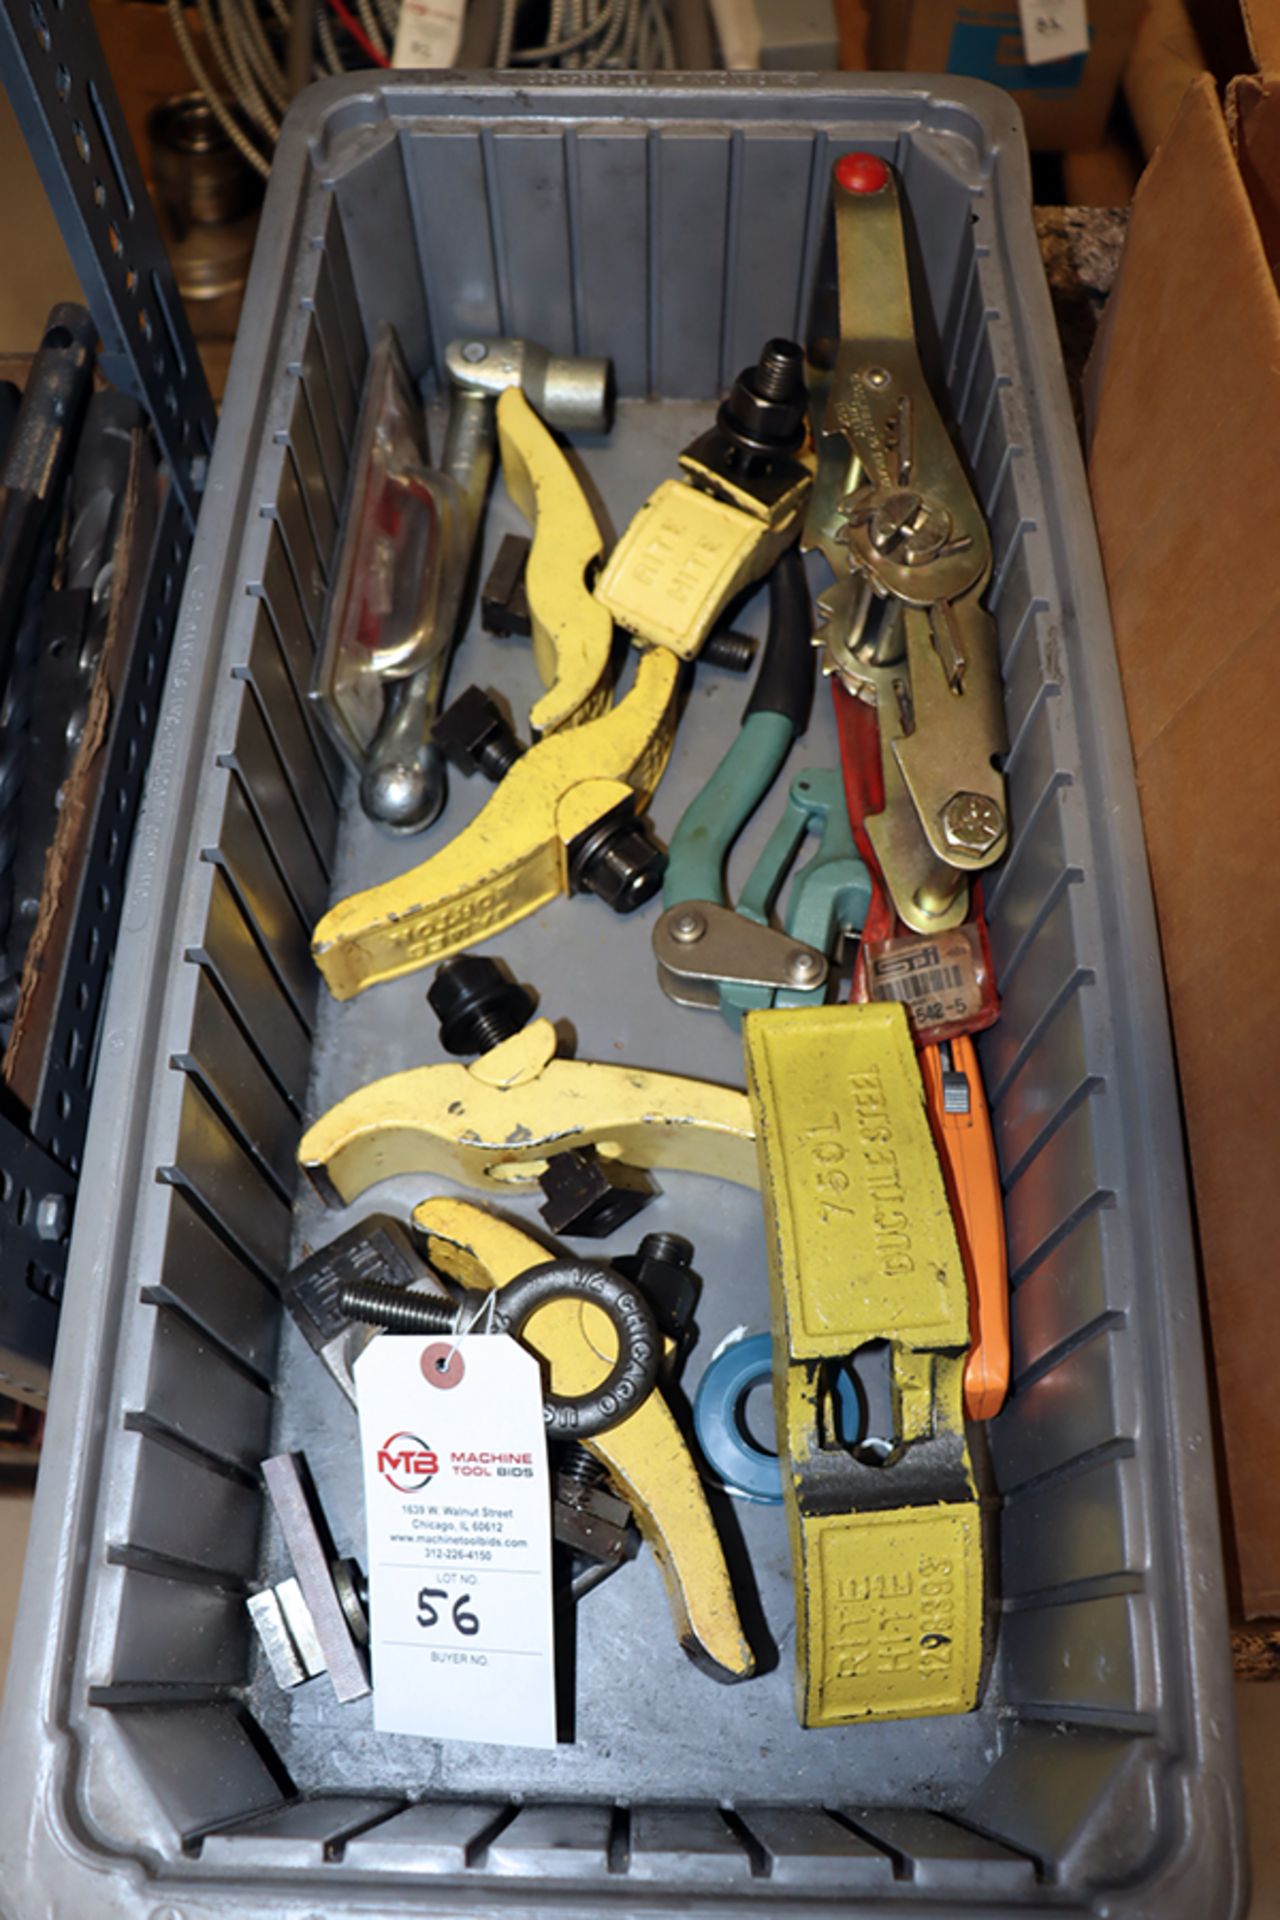 Hold Down Clamps and Other Pictured Hardware/Tools